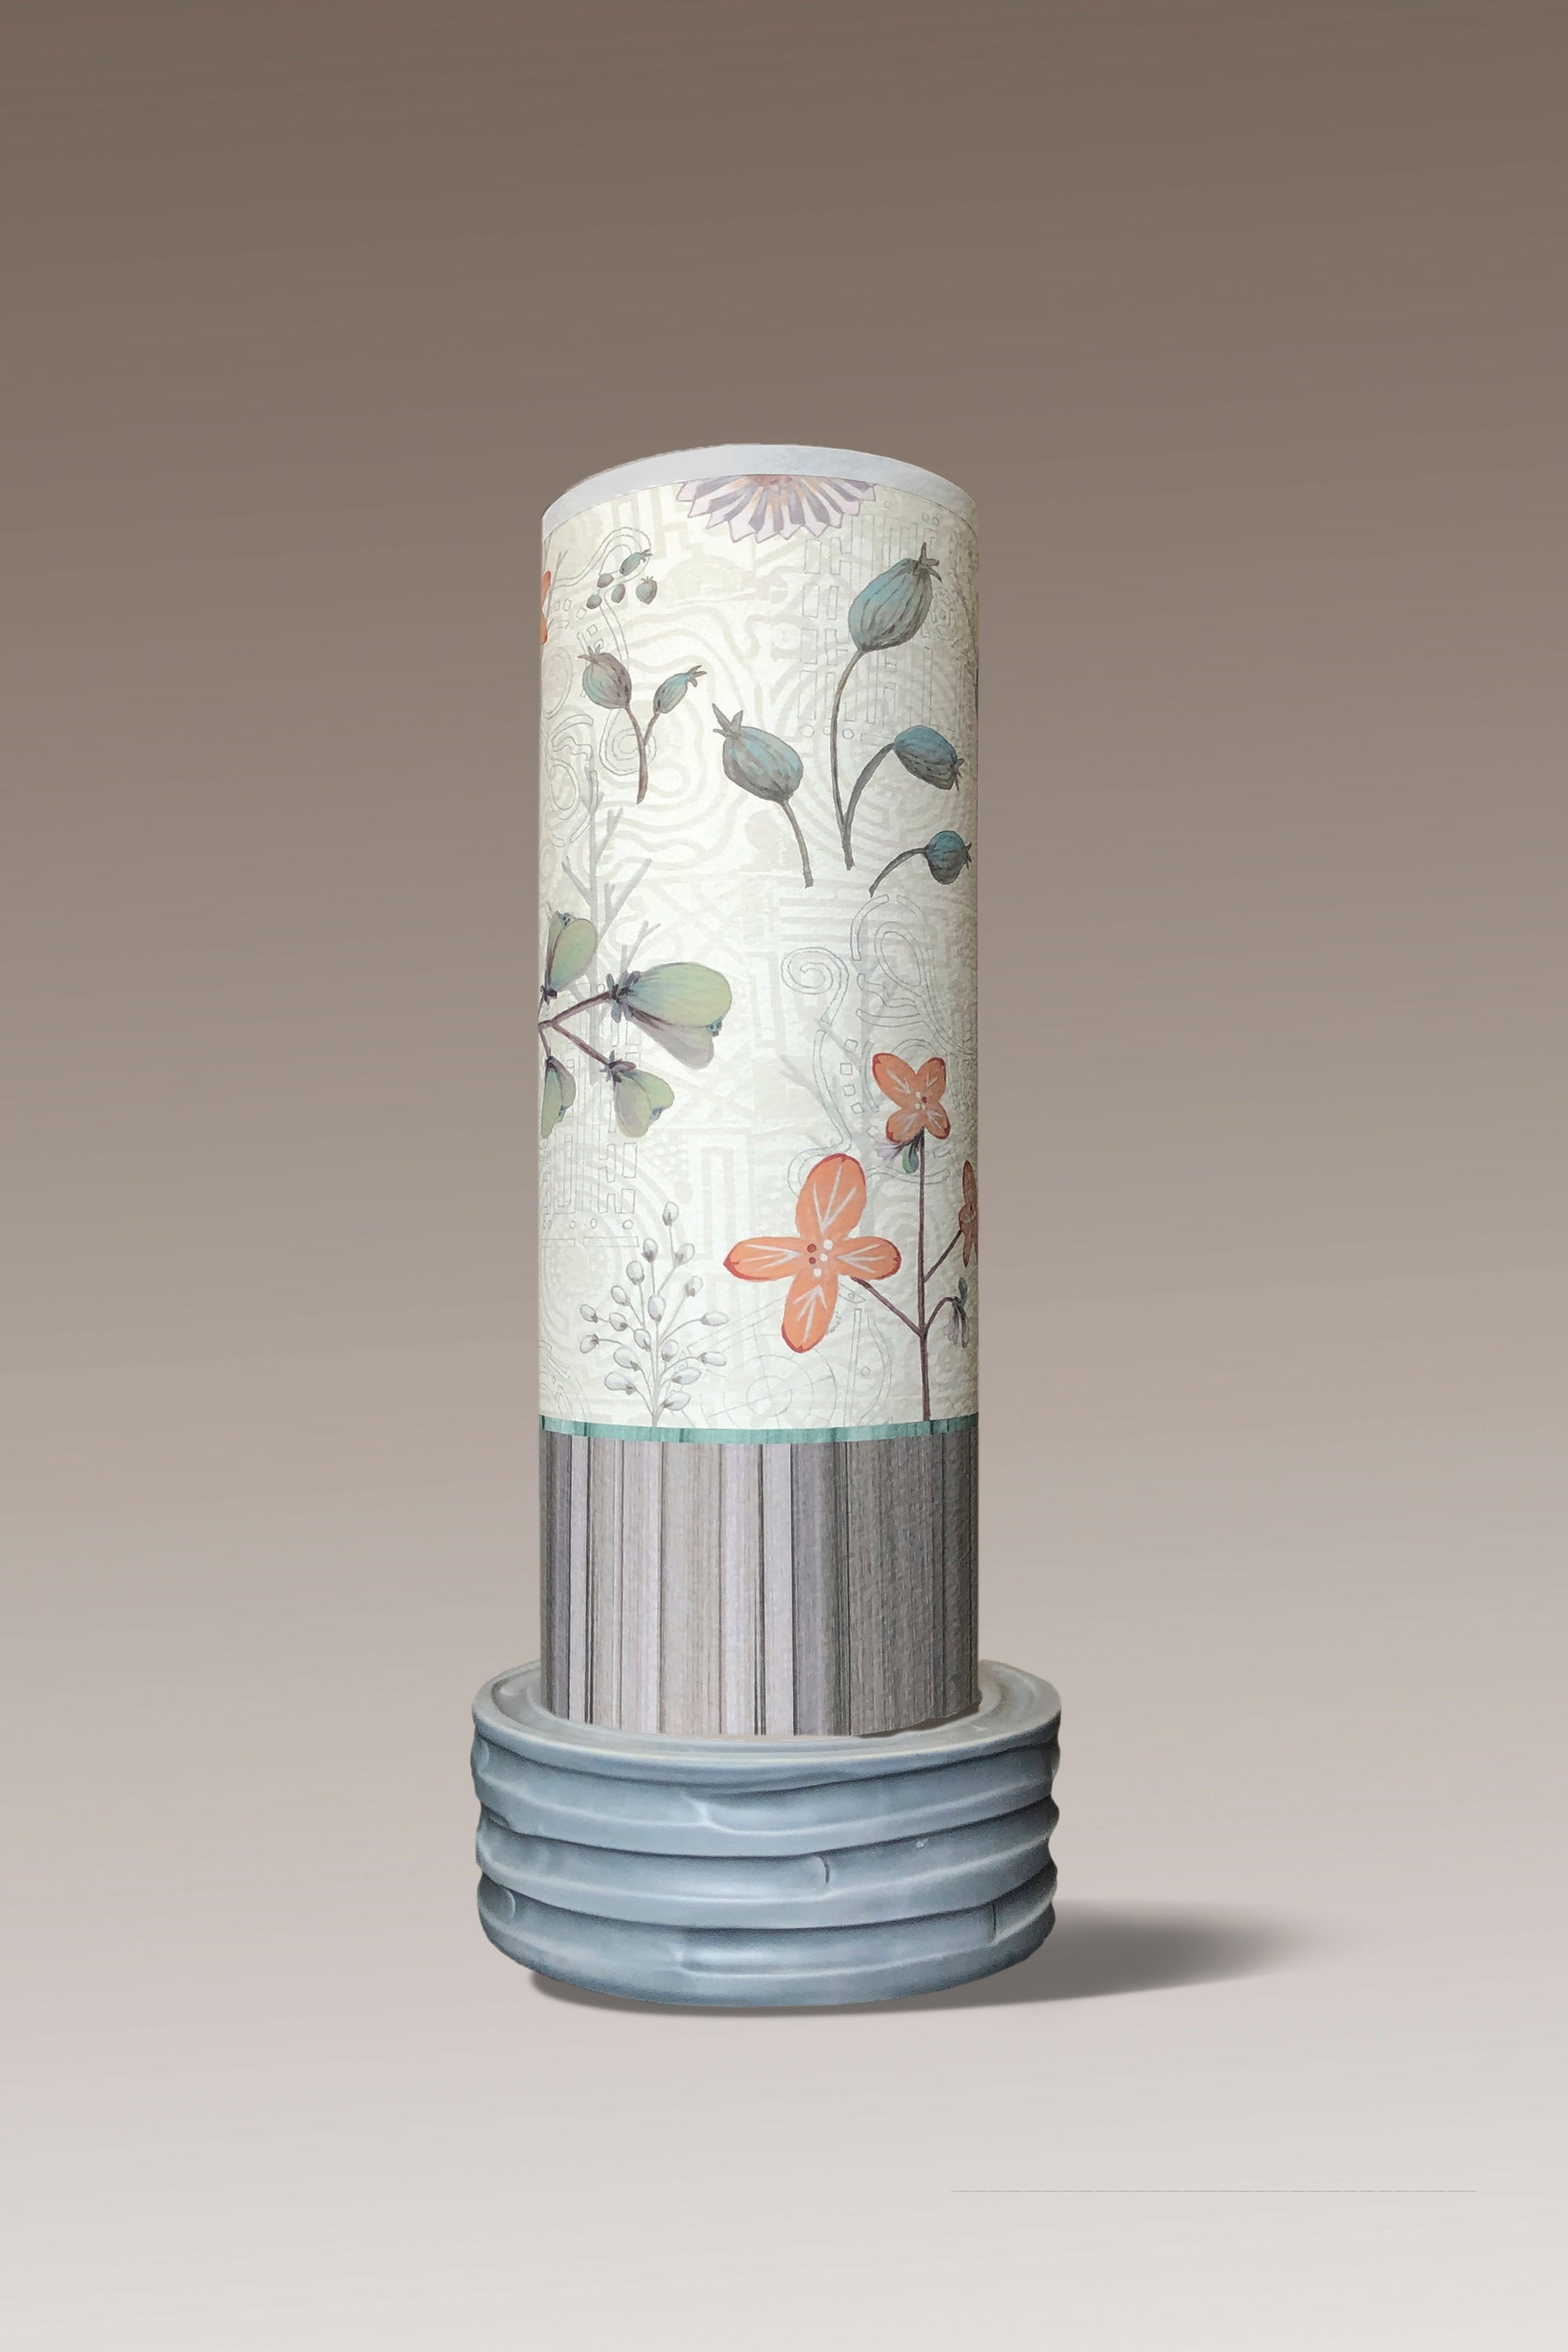 Janna Ugone & Co Luminaires Ceramic Luminaire Accent Lamp with Flora and Maze Shade